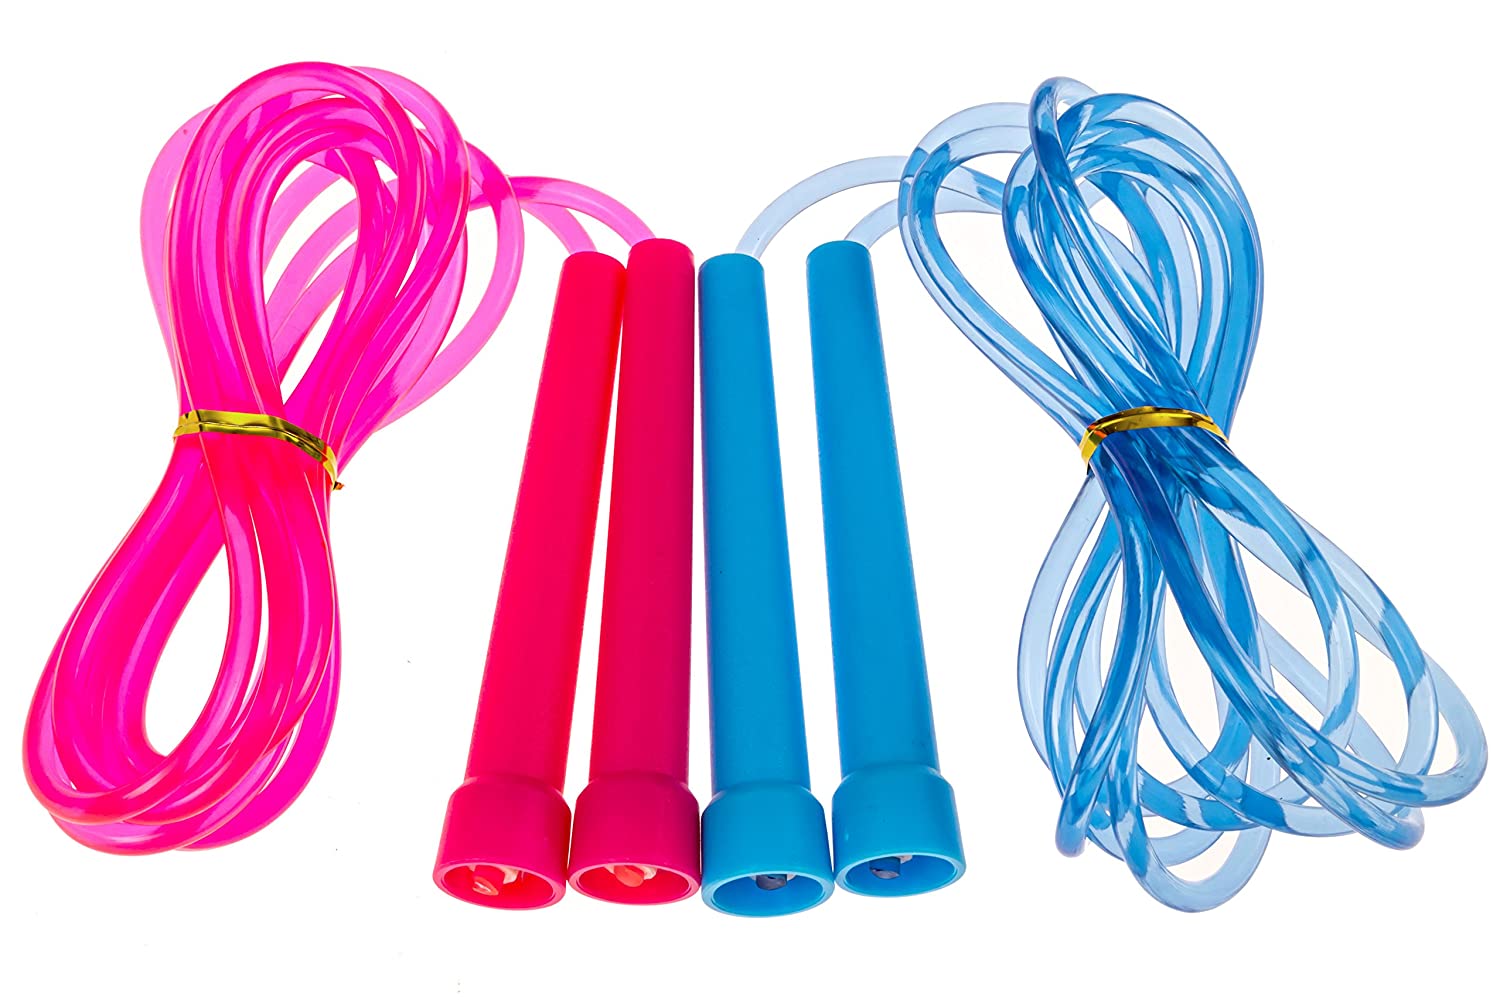 Jump Rope for Kids (2 Pack) - Set of 2 9ft Adjustable Skipping Ropes (Pink & Blue) for Children Jumping Games Songs and Rhymes